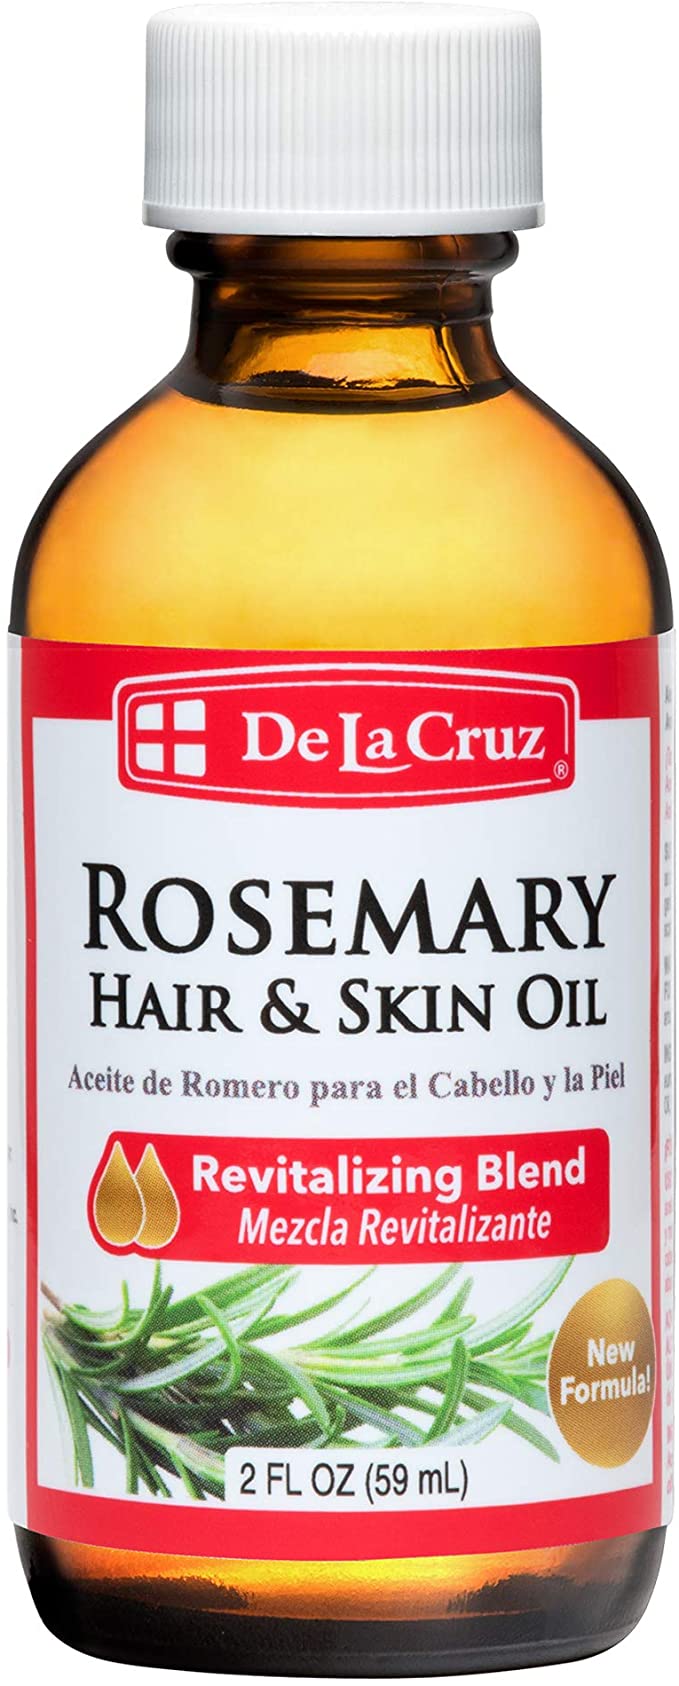 De La Cruz Oil of Rosemary Blend for Skin and Hair, No Preservatives, Artificial Colors or Fragrances, Made in USA, 2 FL. OZ.